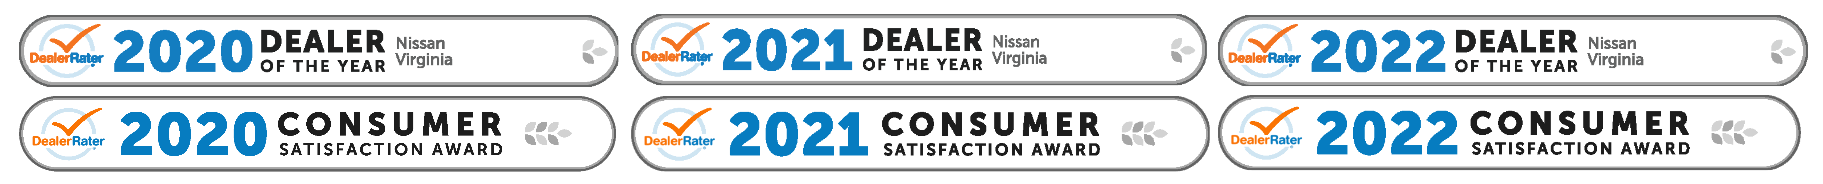 Virginia Nissan Dealer of the year and consumer satisfaction awards, 2020 through 2022